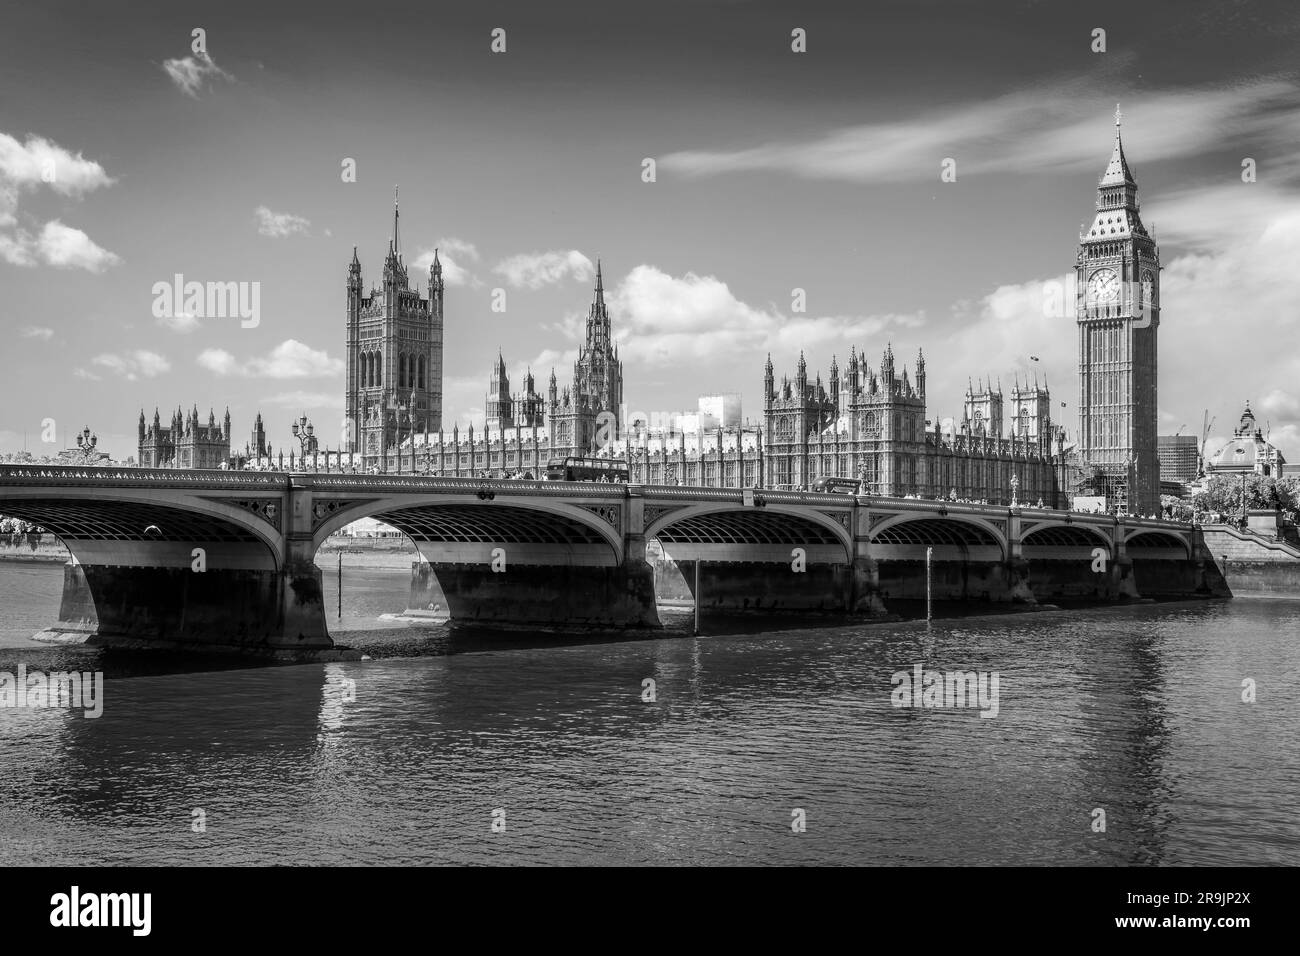 Westminster bridge over river Thames, Big Ben and the houses of parliament in London, UK. Black and white photography. Stock Photo